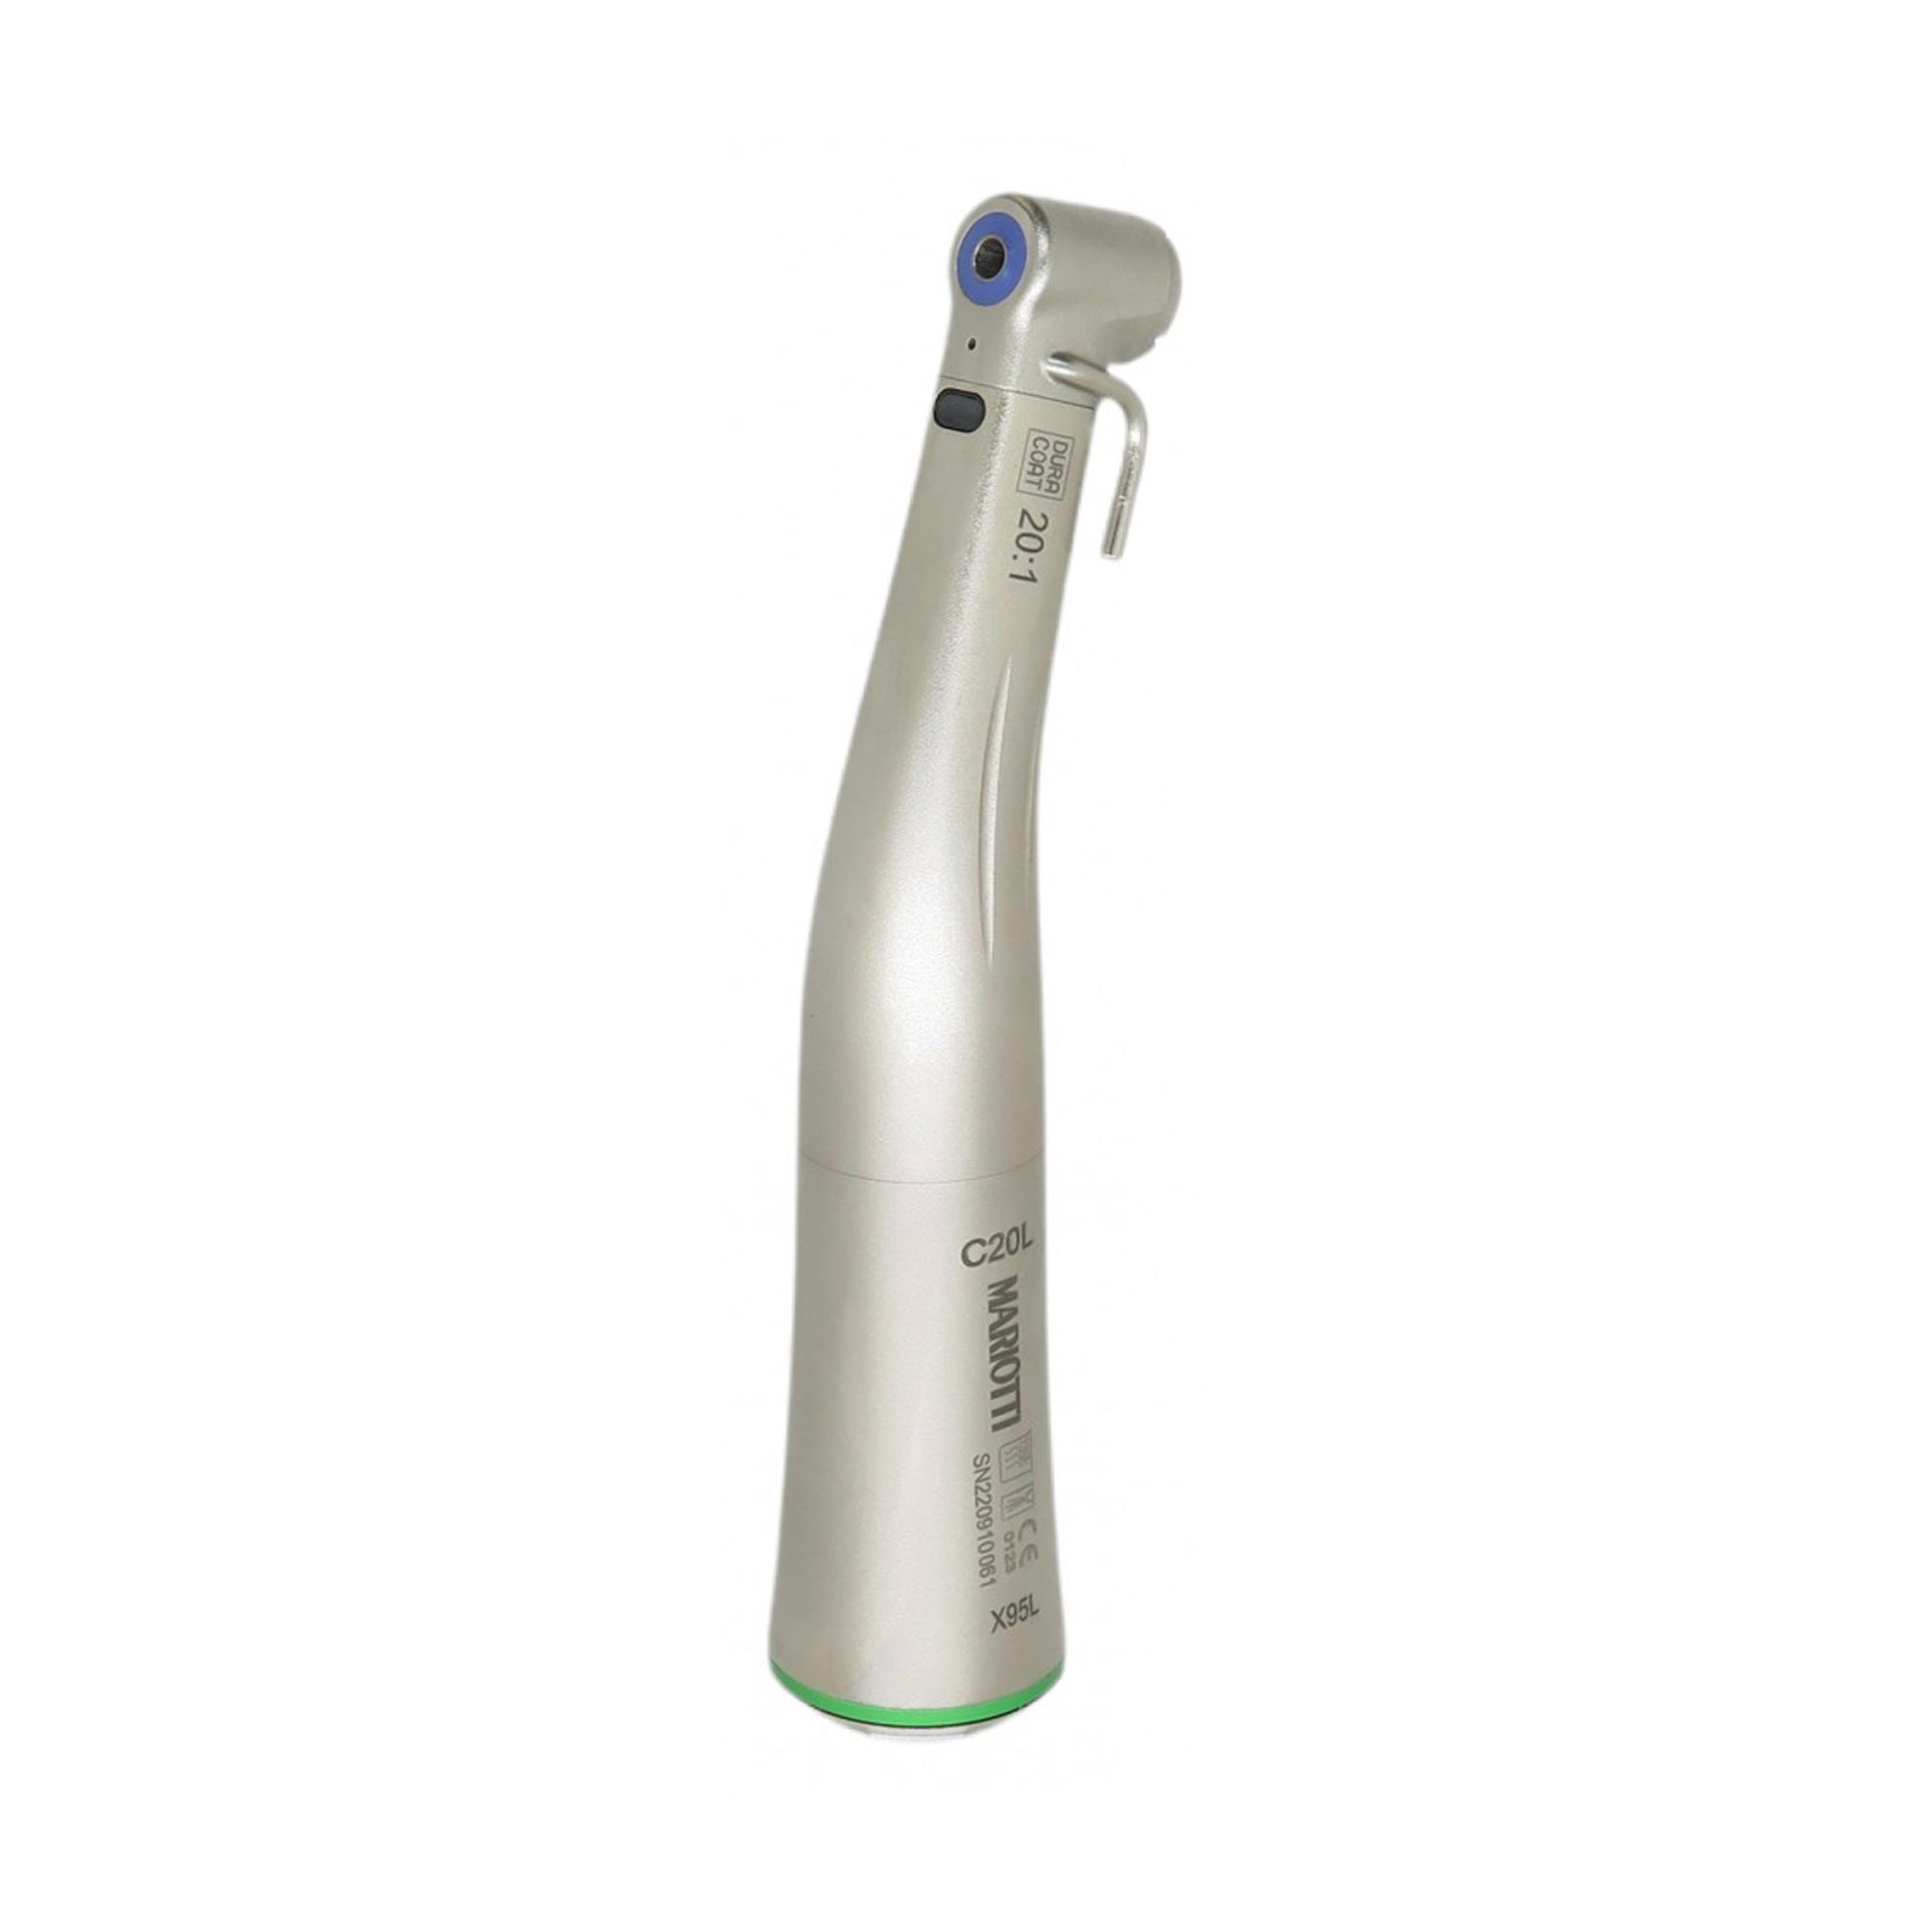 DSI Slow Speed Optic Contra-Angle Handpiece For Surgical Motor 20:1